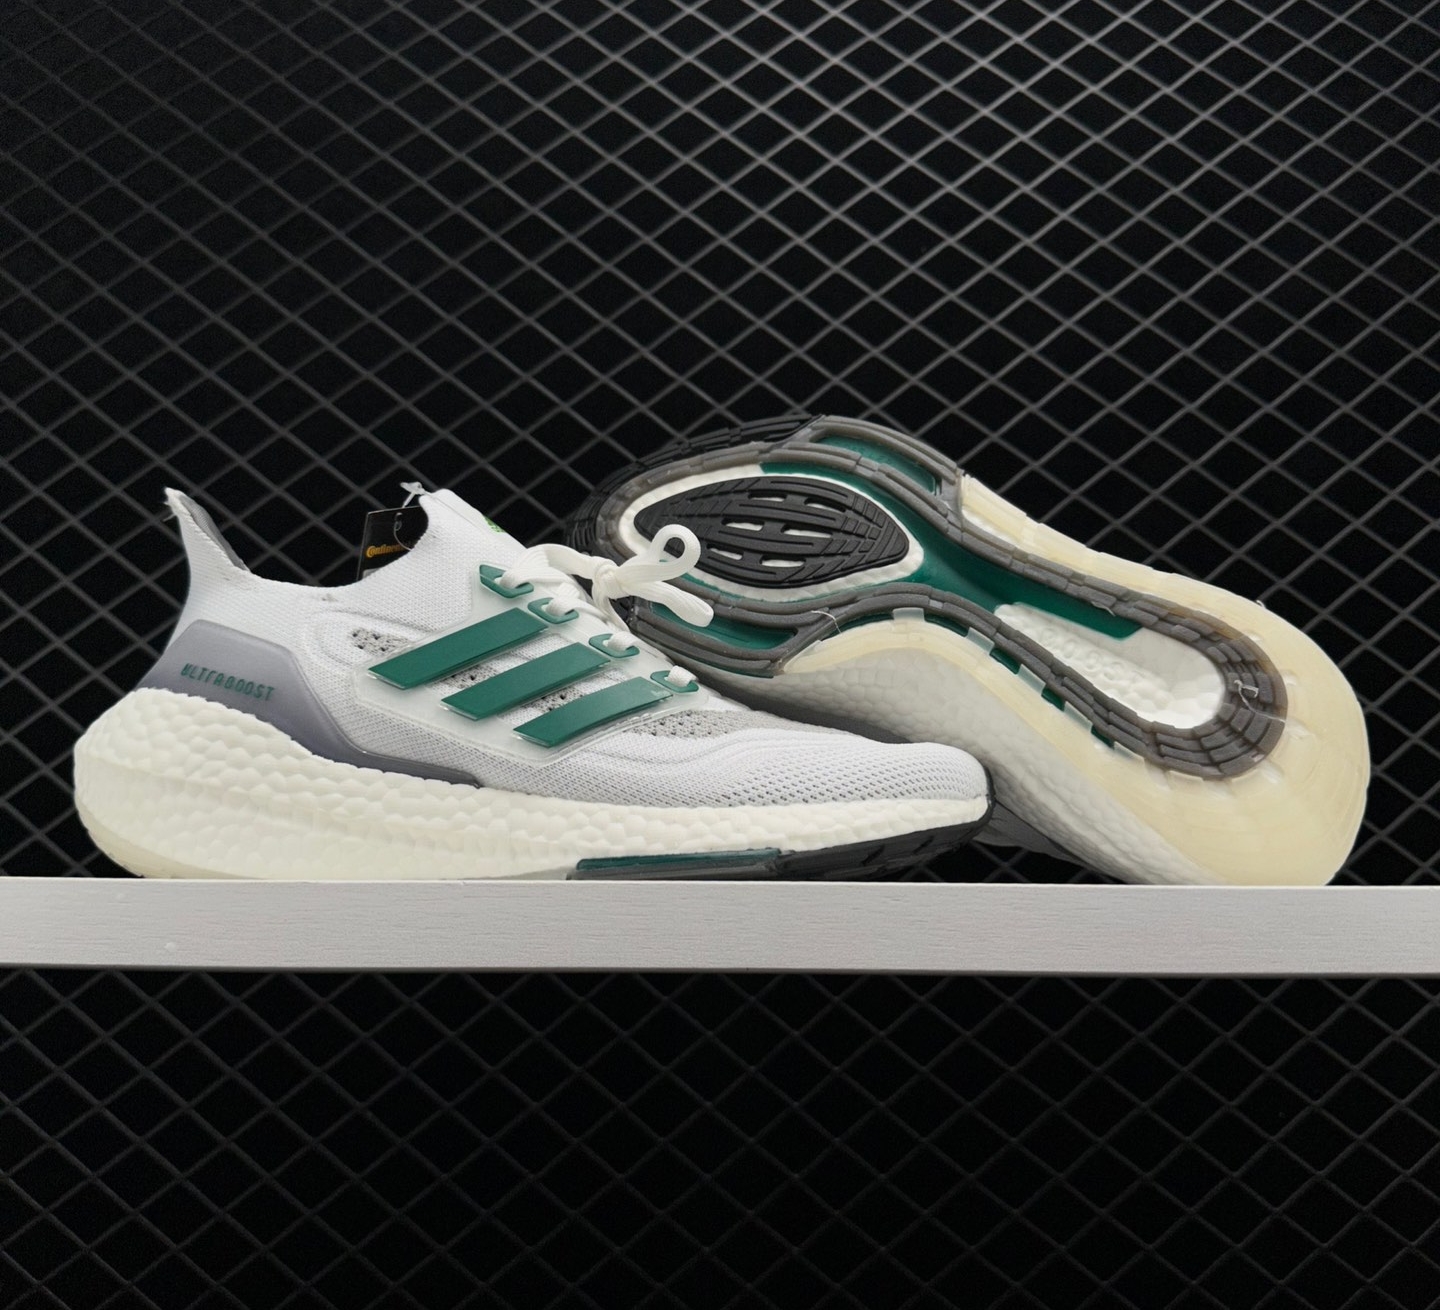 Adidas UltraBoost 21 'White Sub Green' FZ2326 - Latest Release at Competitive Prices